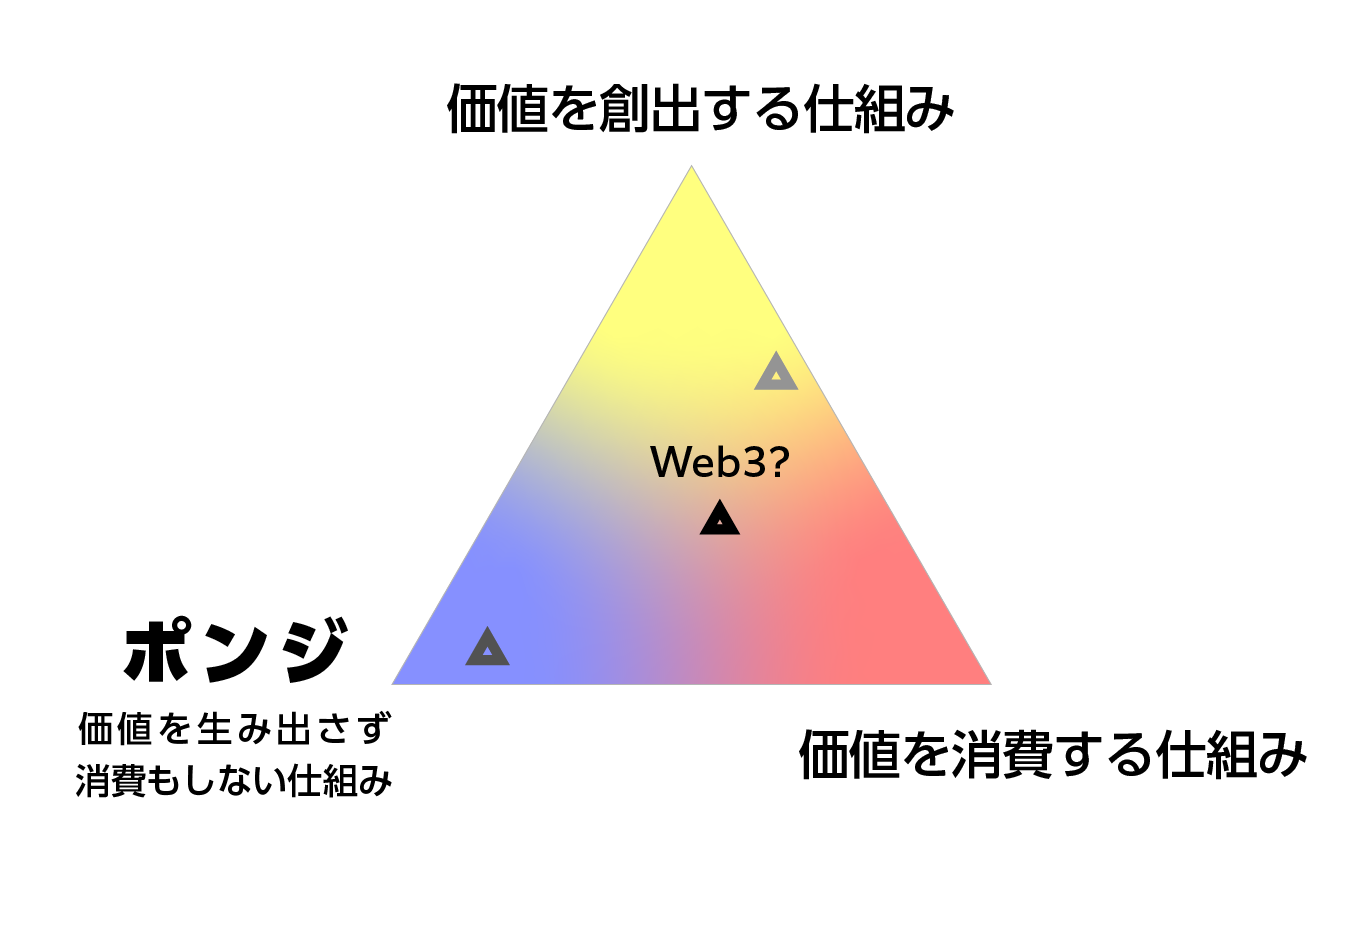 what's web3